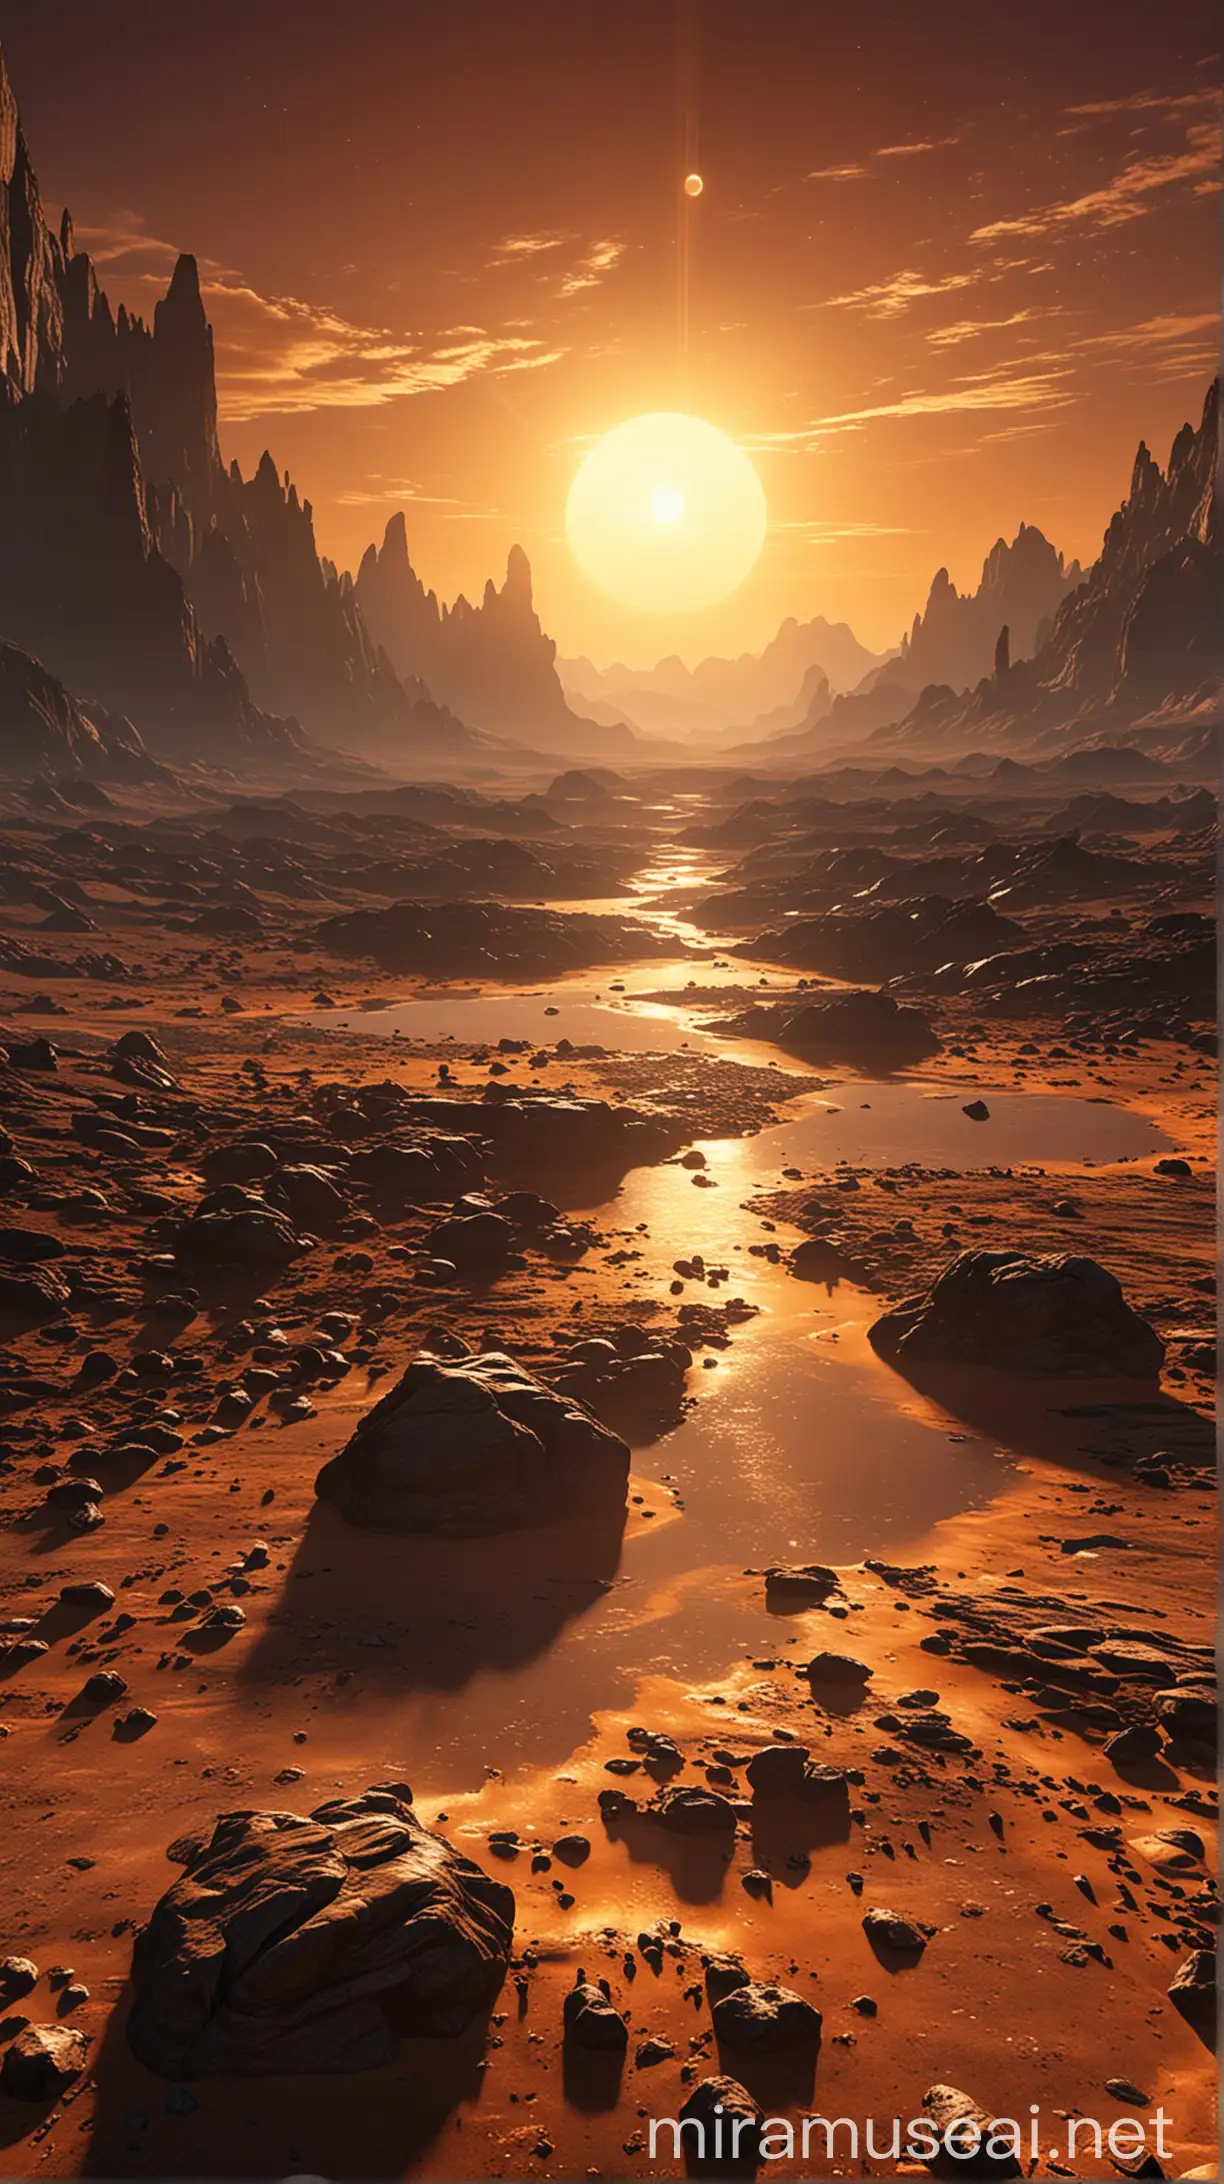 Two Suns on an Alien Planet:  Description: A breathtaking view of a planet with two suns setting on the horizon, casting a warm, golden light across a diverse alien landscape with rocky terrains and distant mountains.